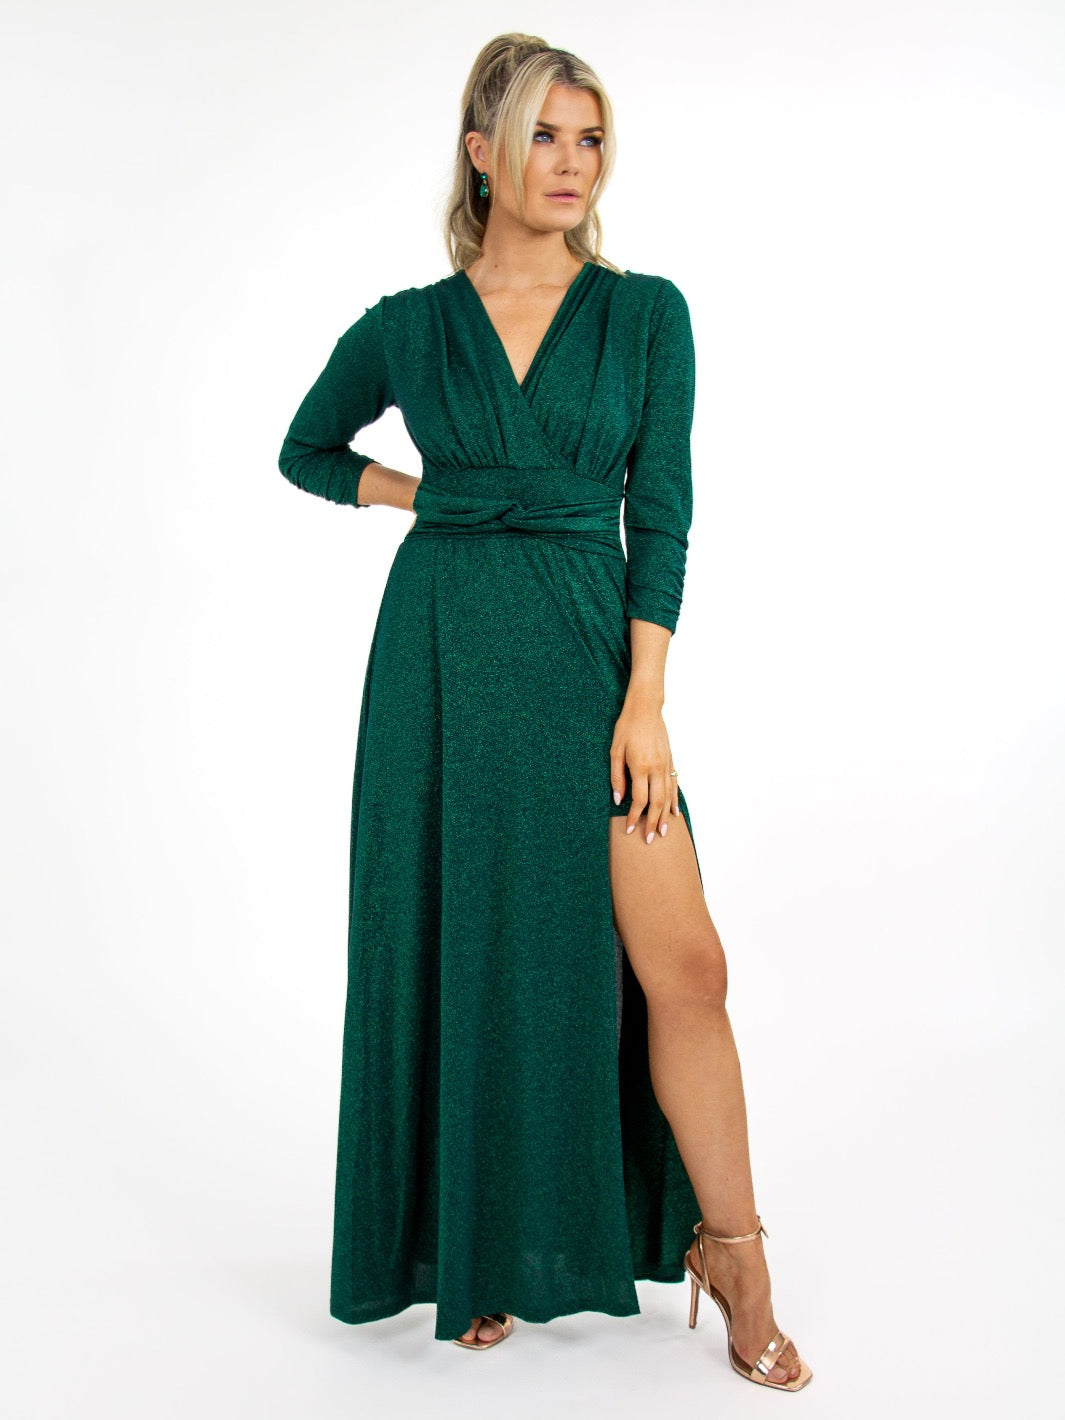 Kate & Pippa Sophia Maxi Dress In Emerald Green Sparkle-Occasion Wear-Guest of the wedding-Nicola Ross